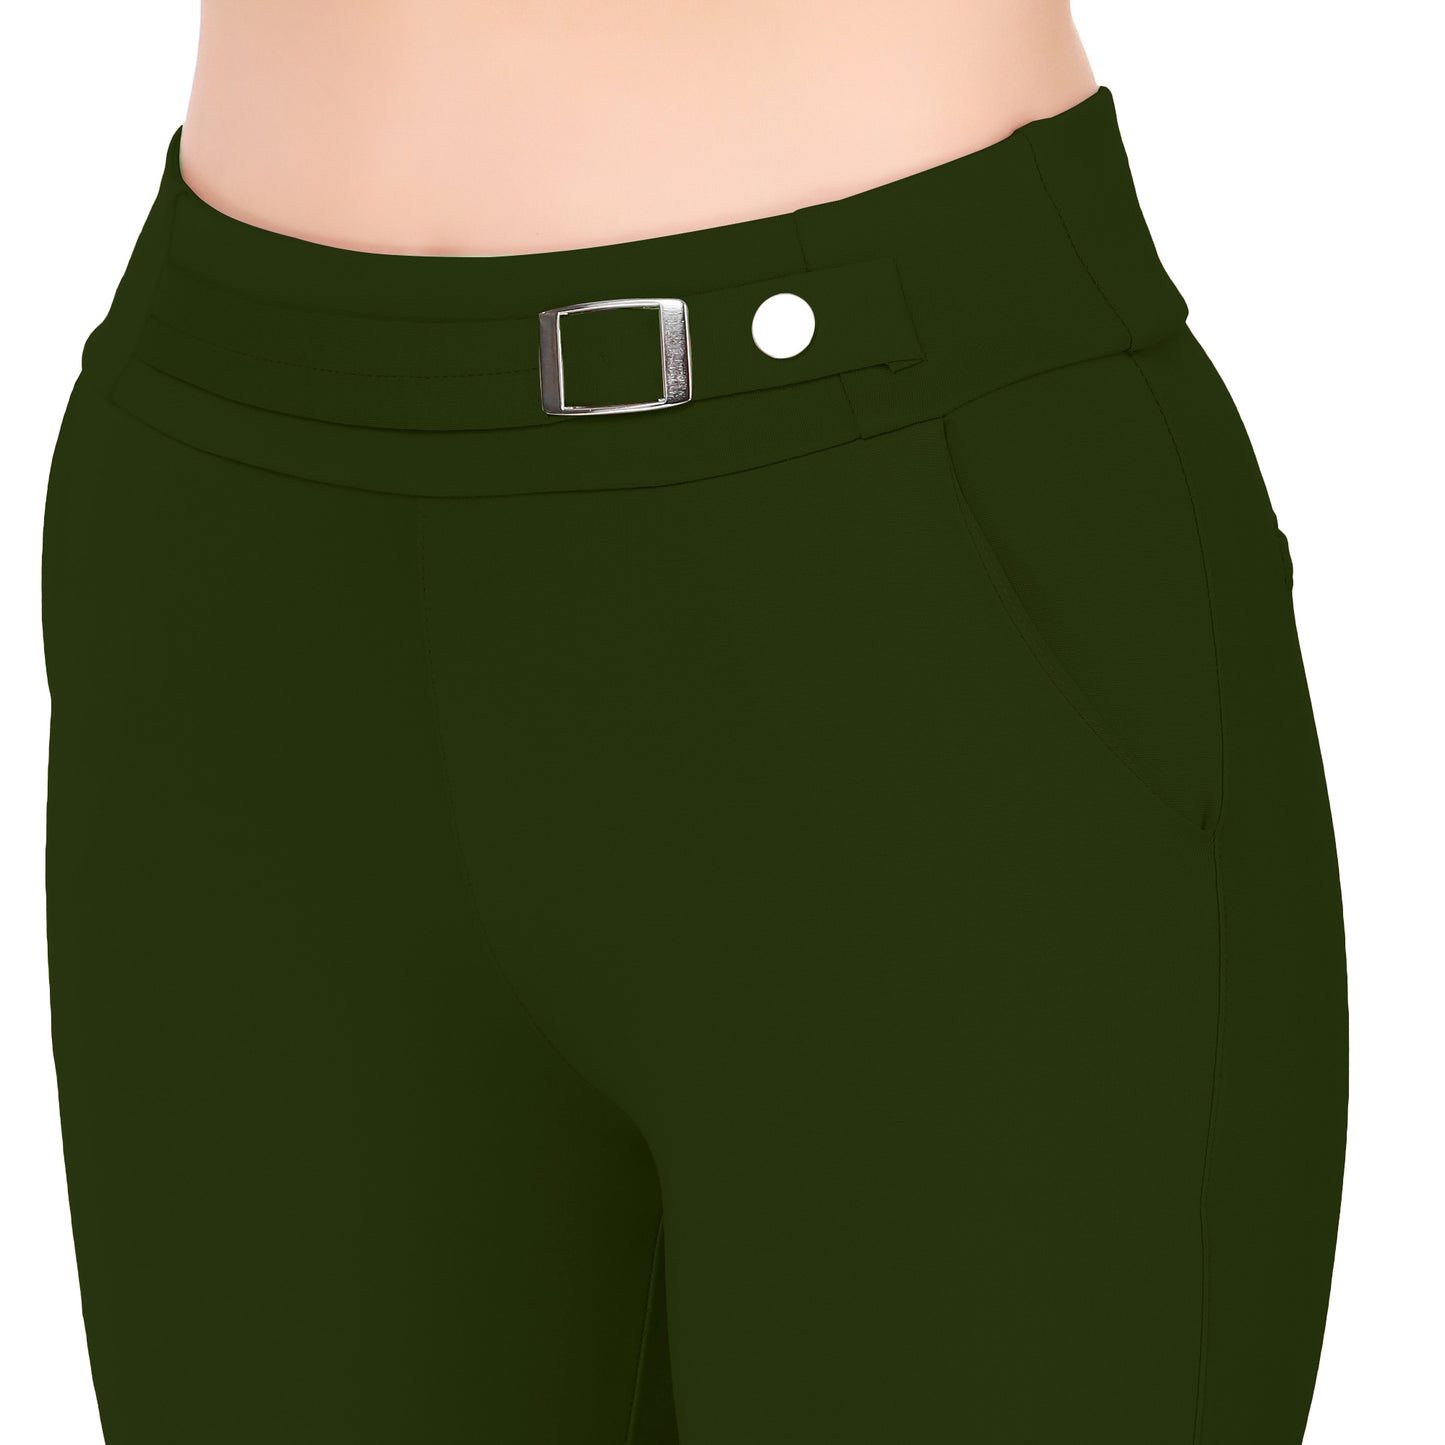 Most Comfortable Women's Mid-Waist Jeggings with 2 Front Pockets - Leaf Green